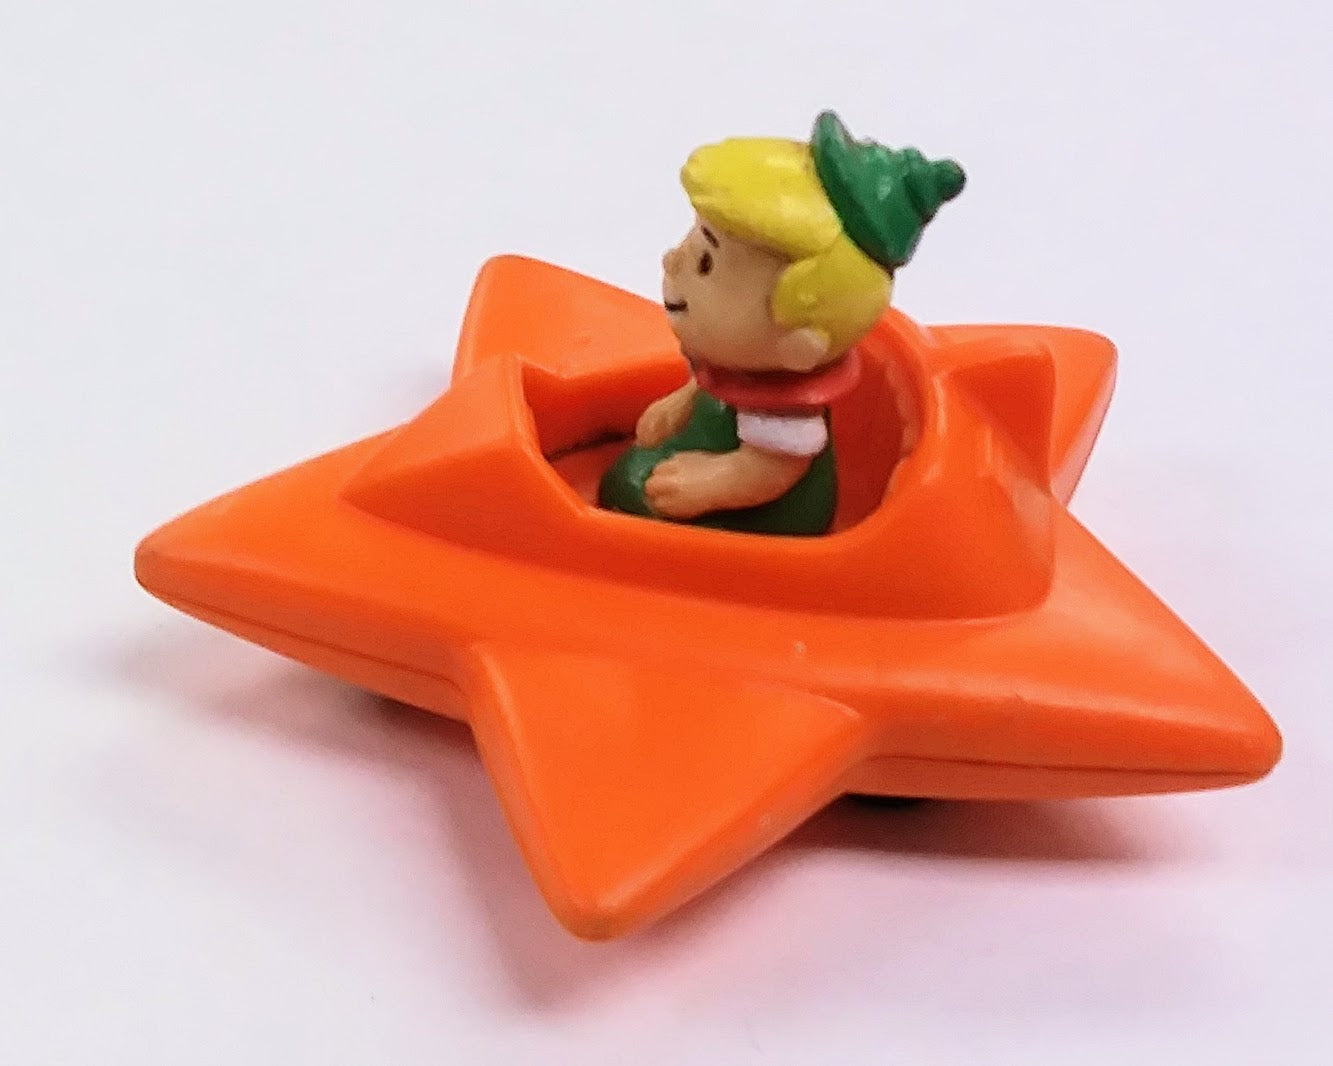 Wendy's Kids Meal toy - Jetsons Elroy